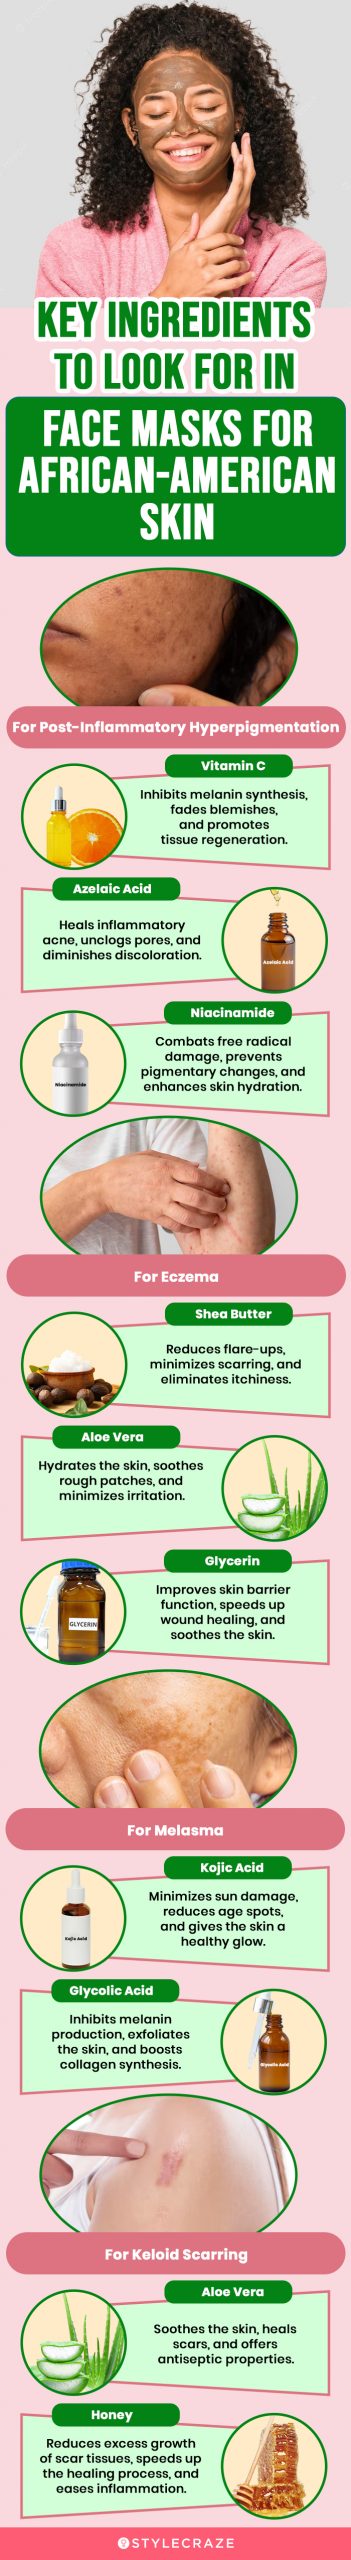 Key Ingredients To Look For In Face Masks For African-American Skin (infographic)